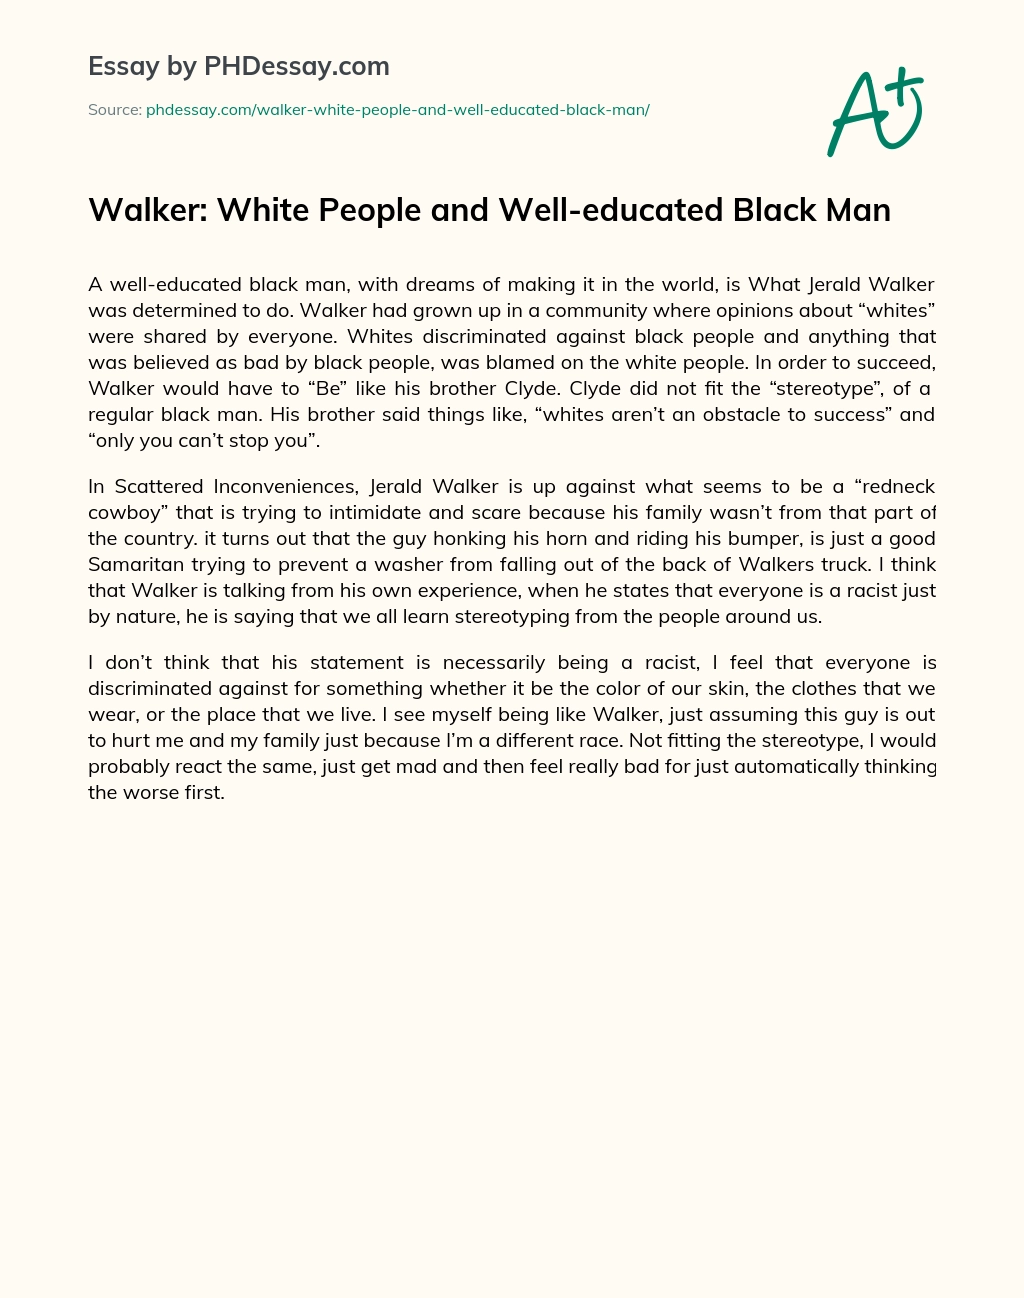 Walker: White People and Well-educated Black Man essay